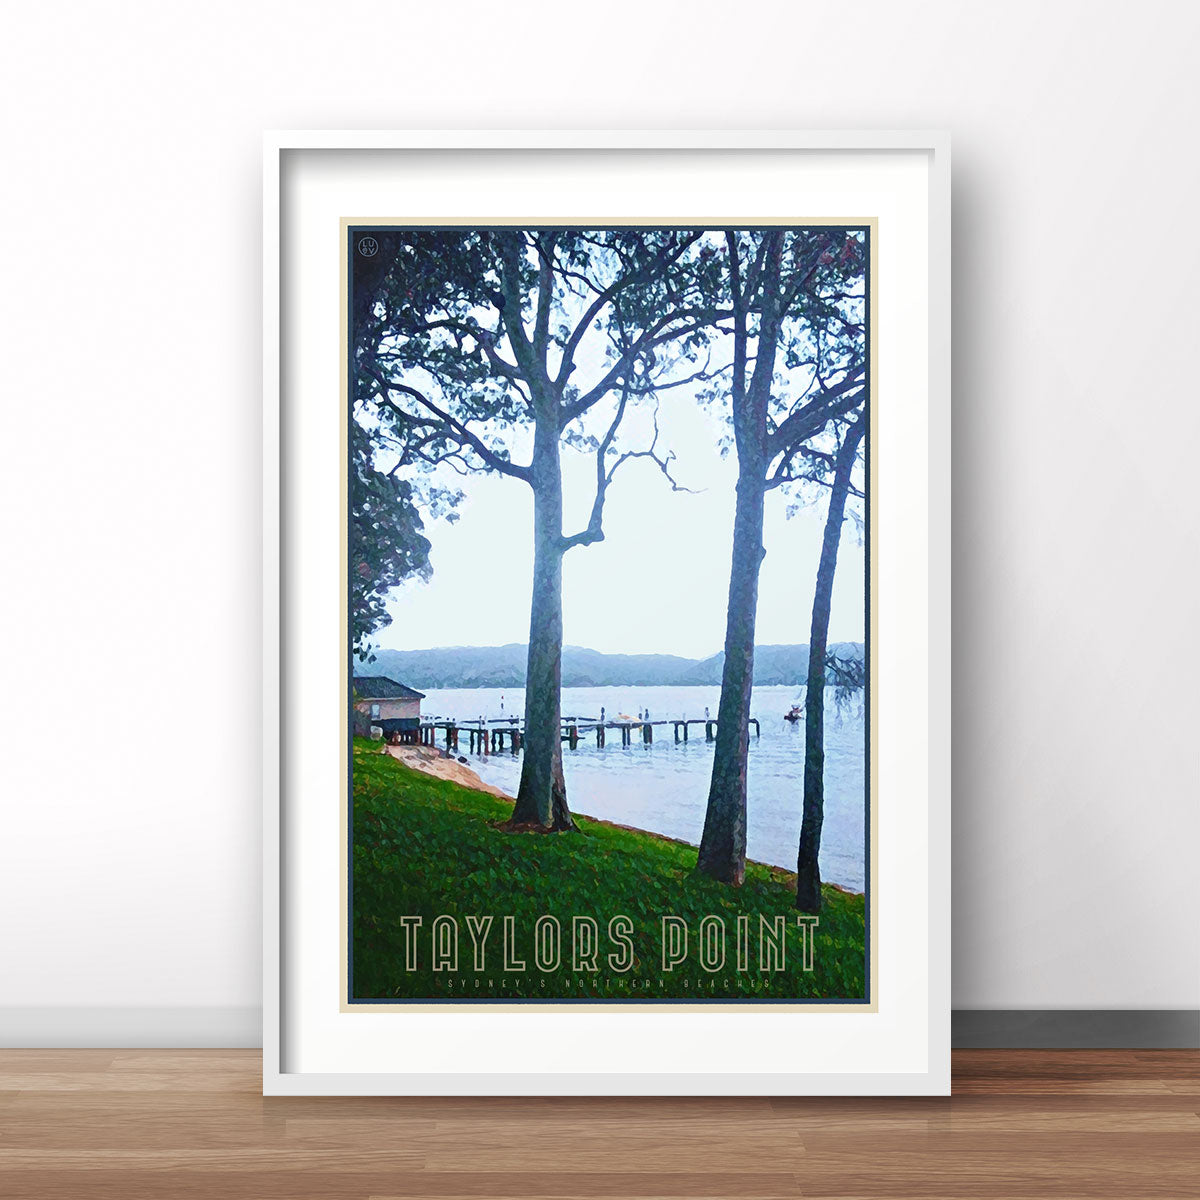 Taylors point vintage style travel print by places we luv